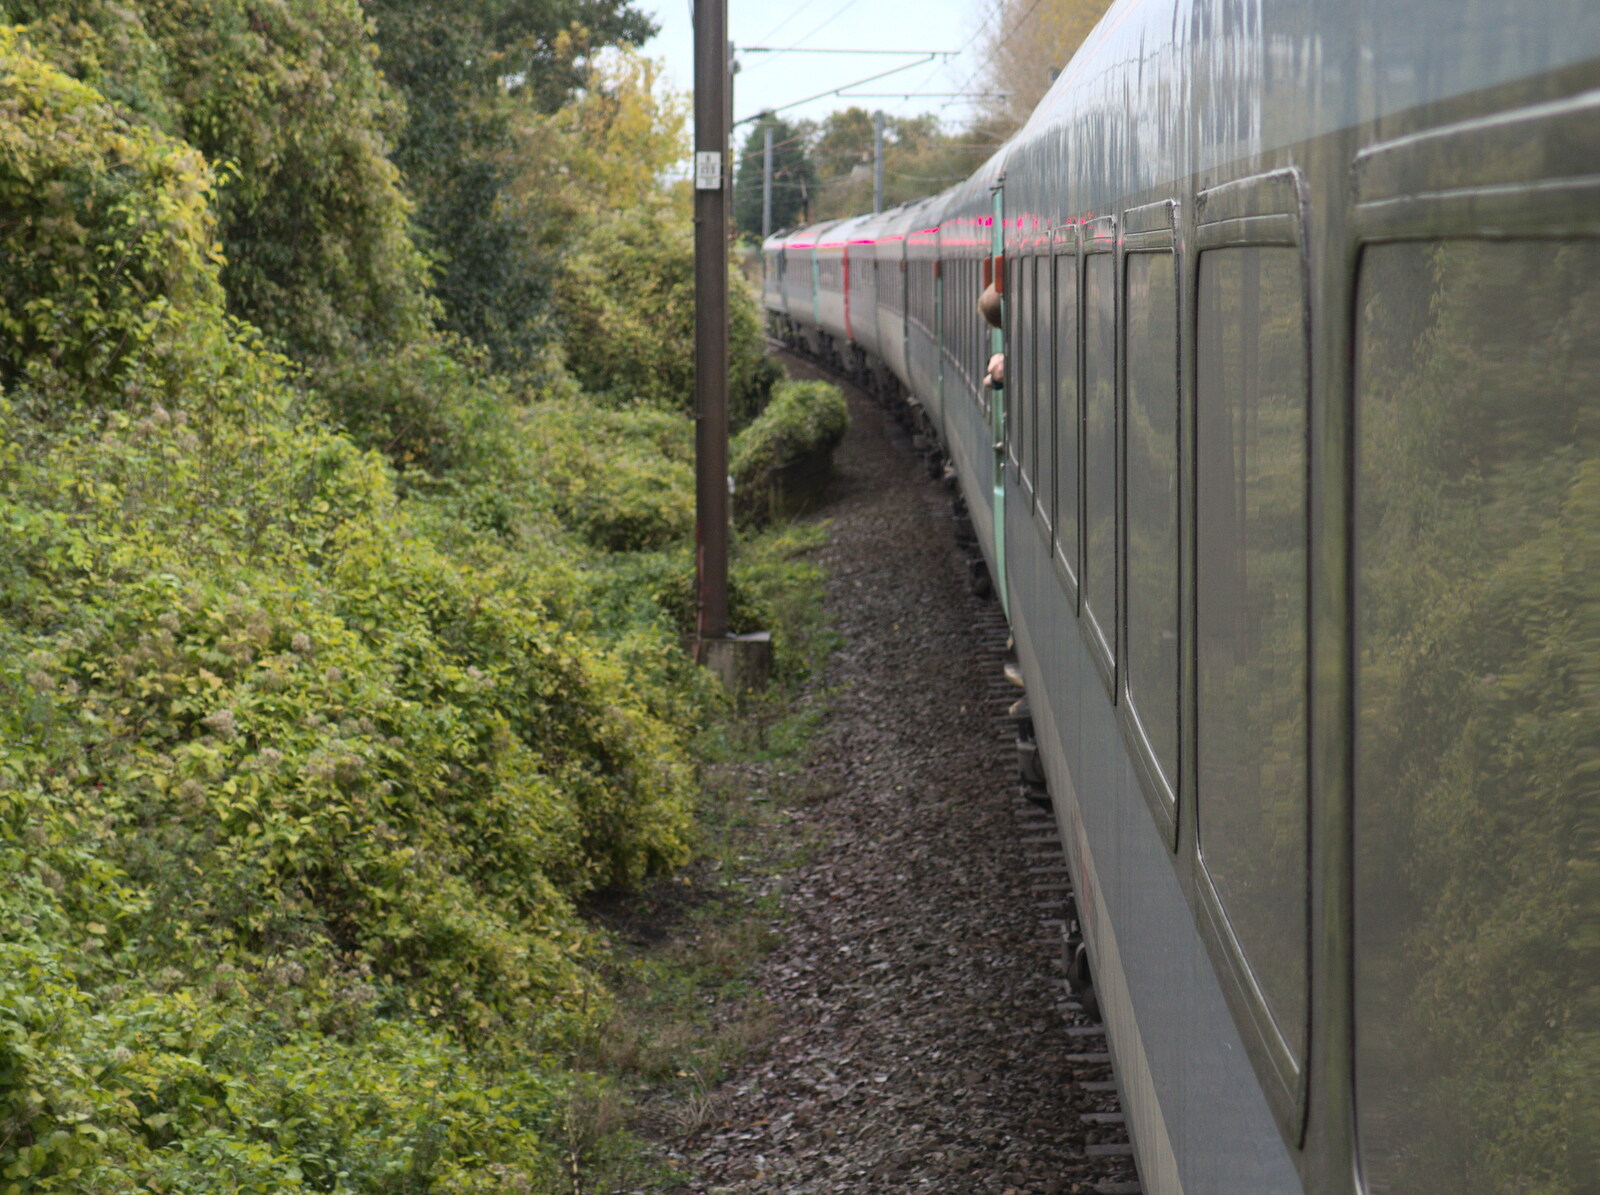 Looking down to the front of the train from (Very) Long Train (Not) Running, Stowmarket, Suffolk - 21st October 2014